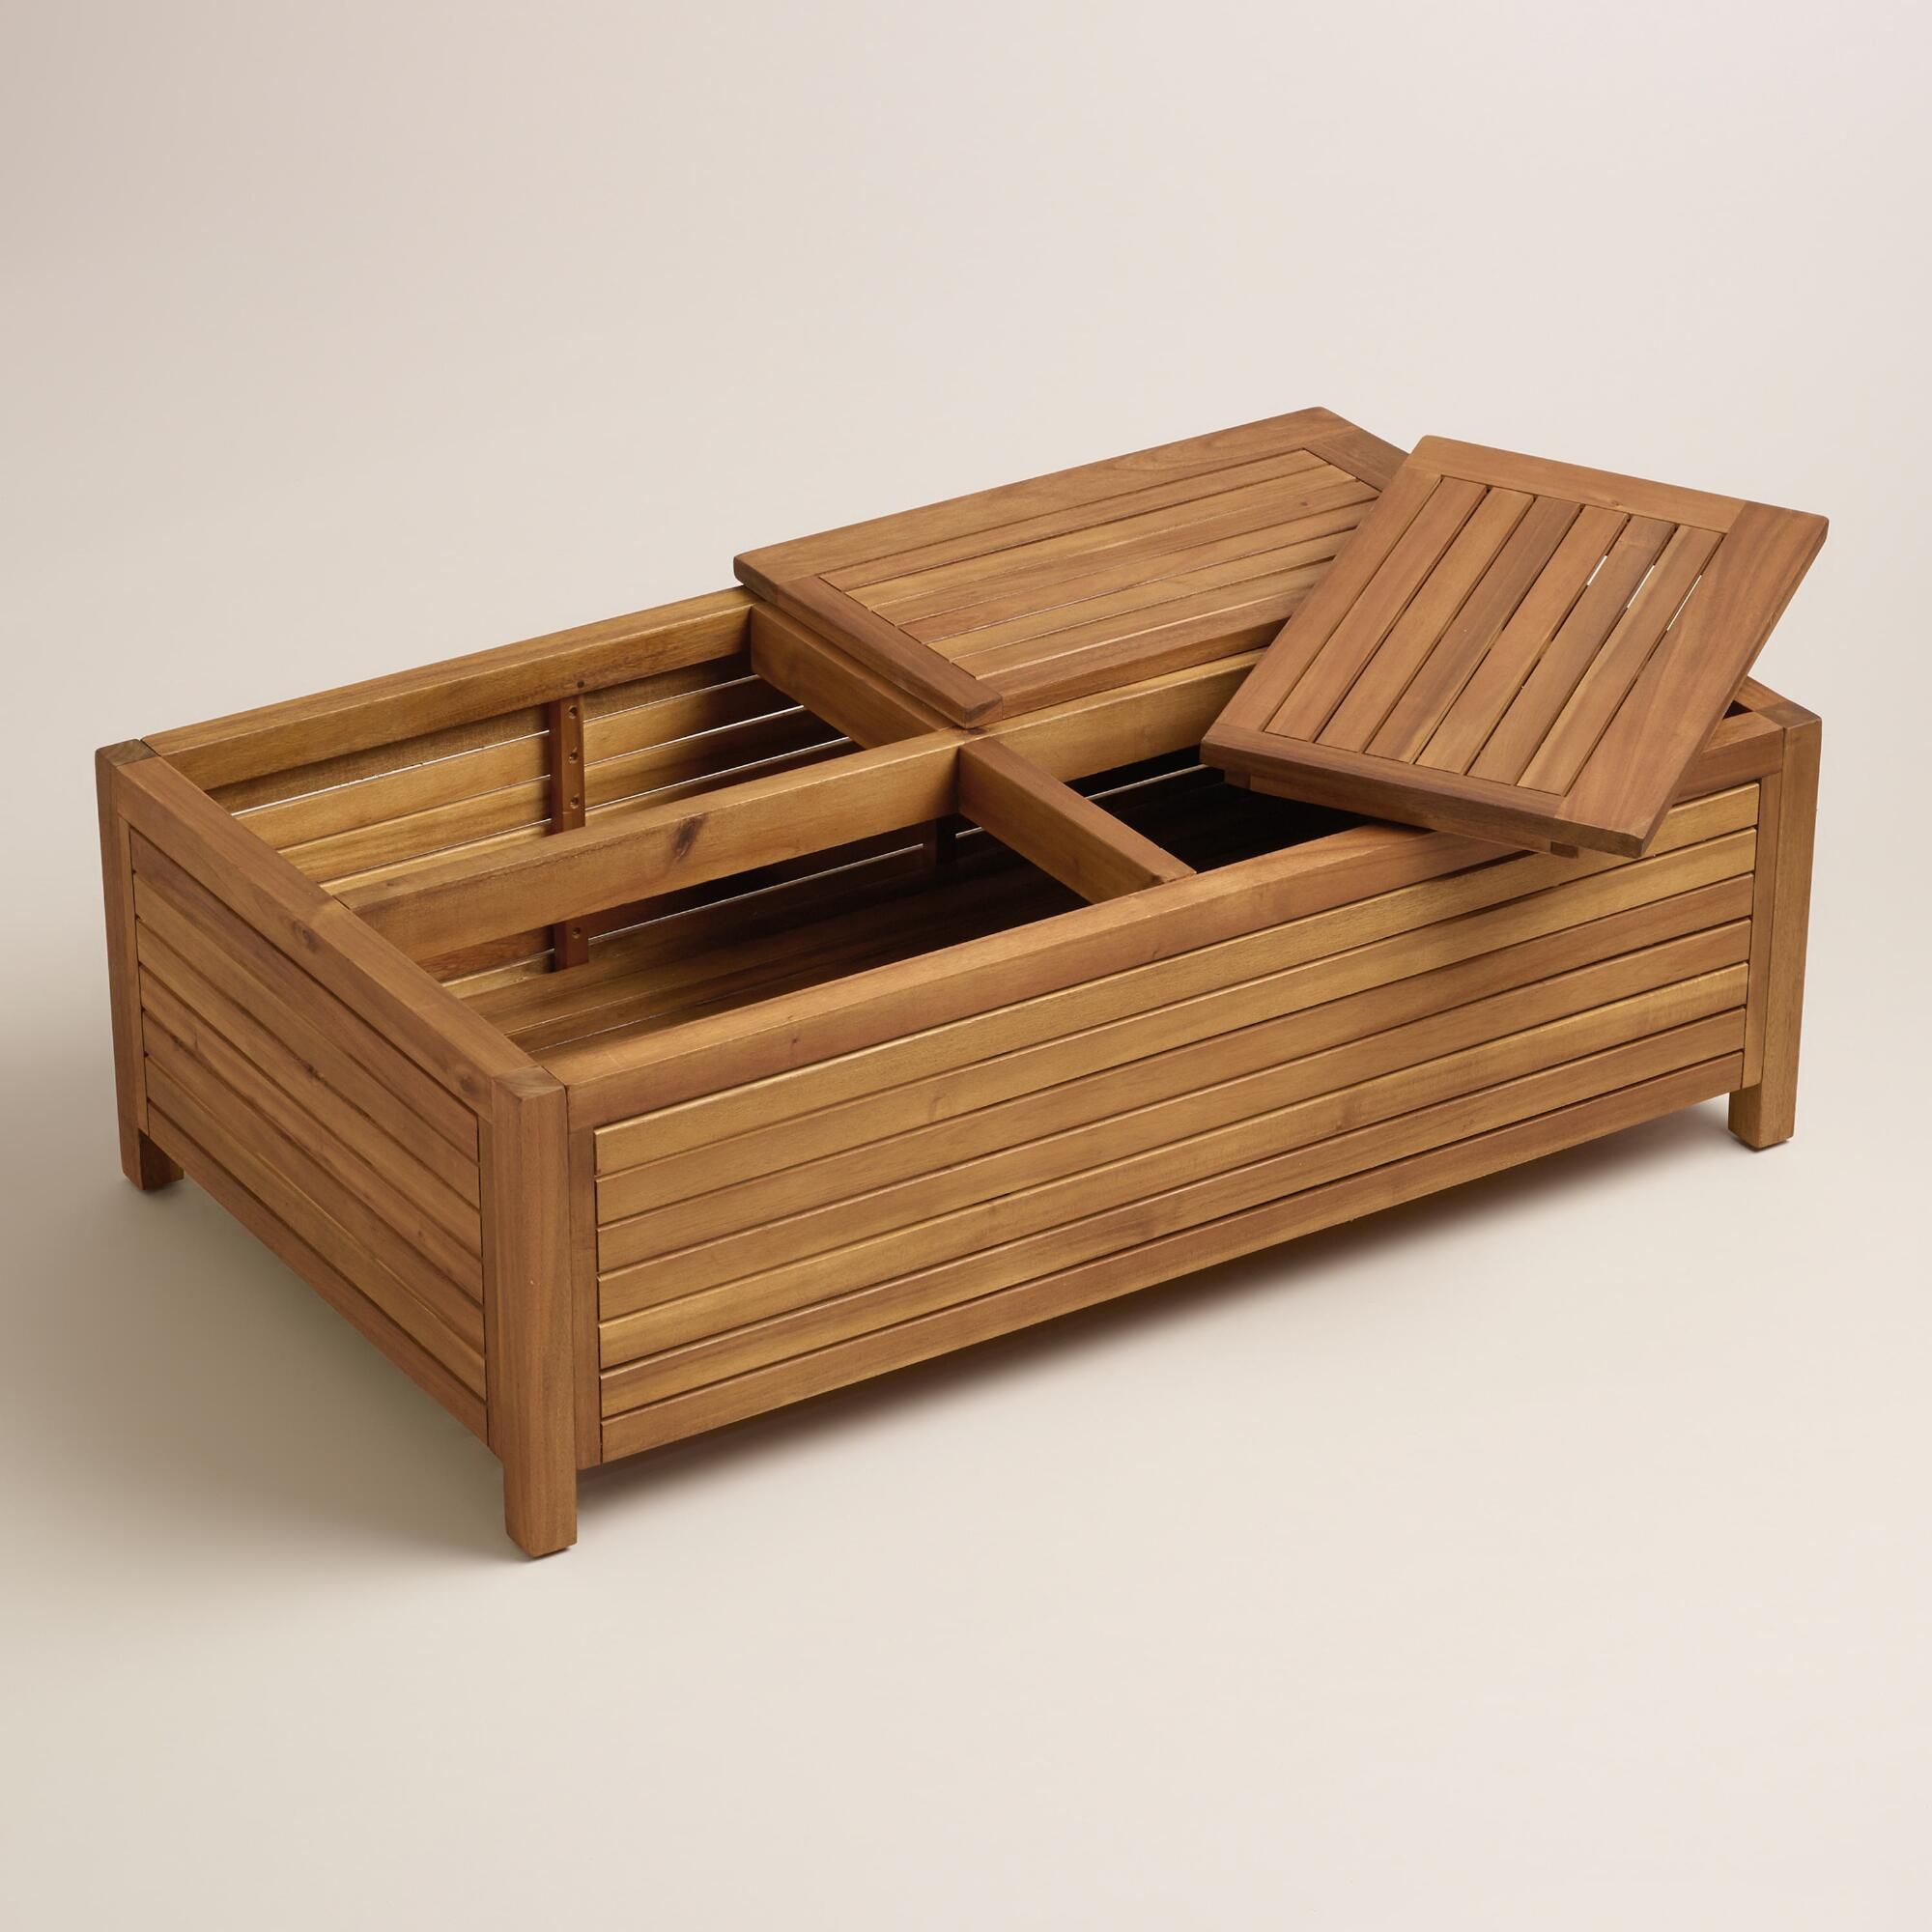 Wood Praiano Outdoor Storage Coffee Table From @worldmarket – A Great Regarding Outdoor Coffee Tables With Storage (Gallery 10 of 20)